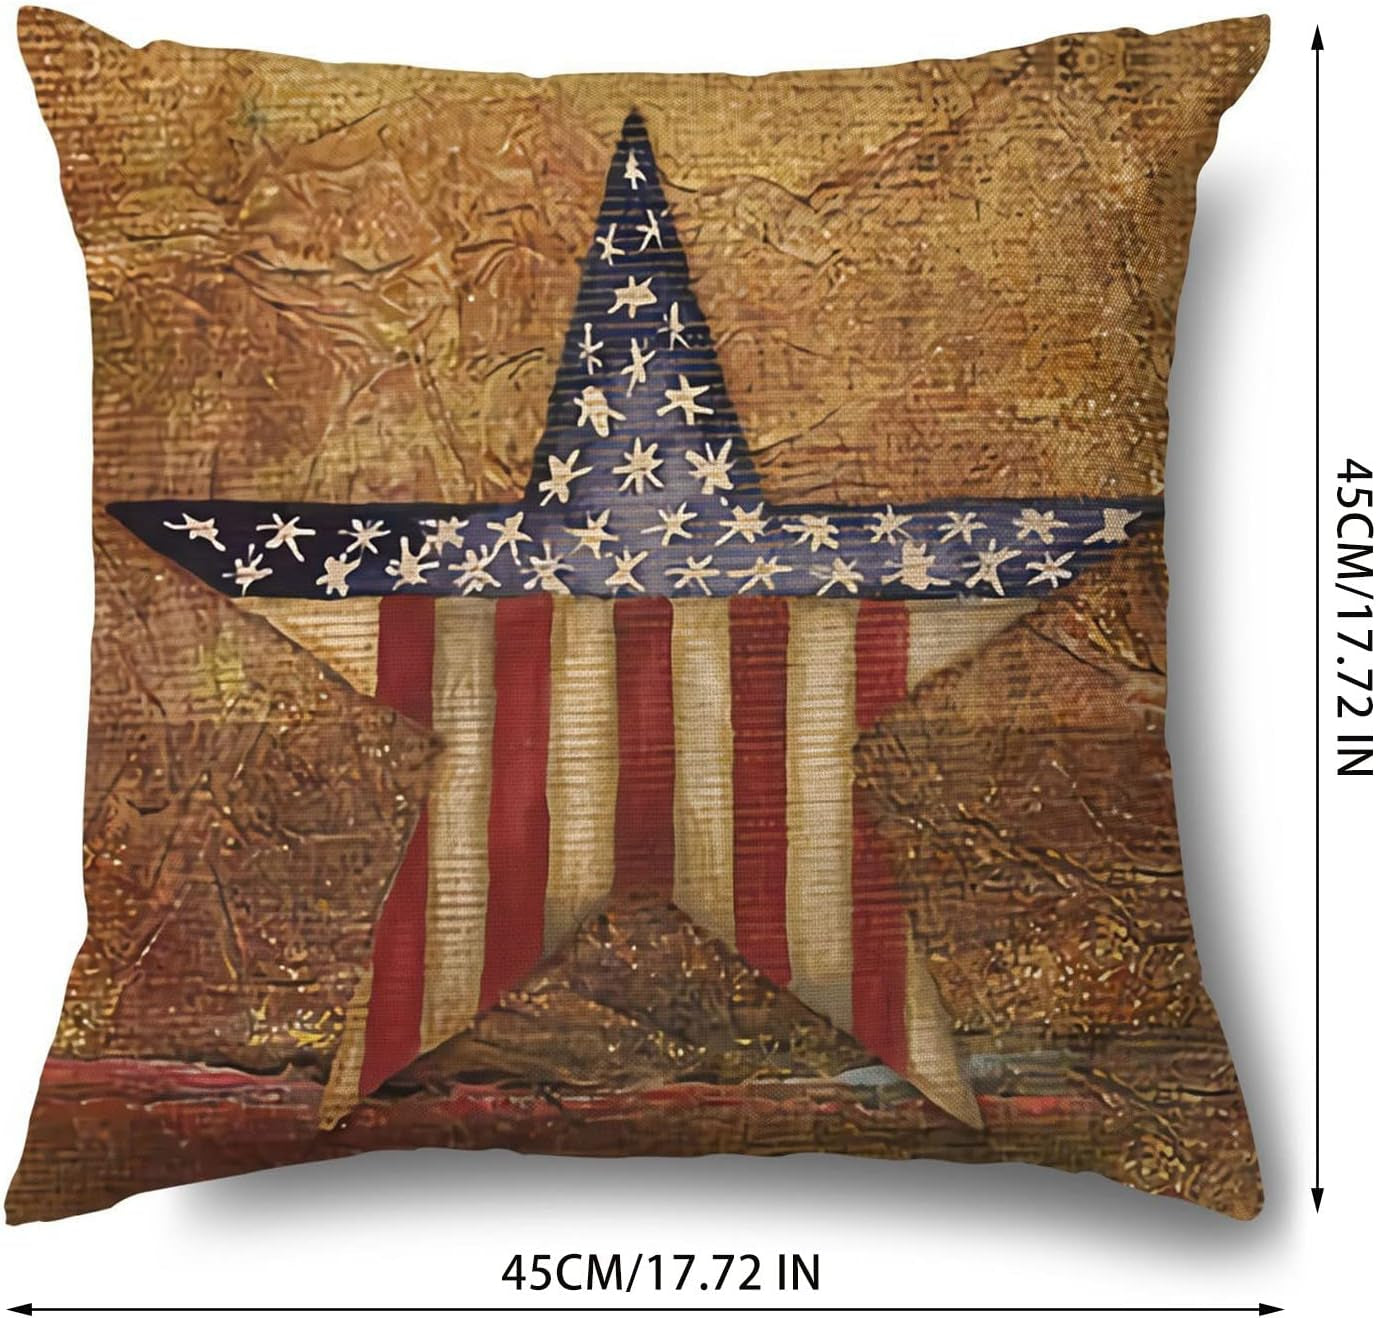 4Th of July Decorations Pillow Covers 18X18 Blue Stars Red White Stripes America Patriotic Pillows Vintage Memorial Day 1776 USA Fourth of July Throw Pillows for Home Sofa Couch Prime of Day